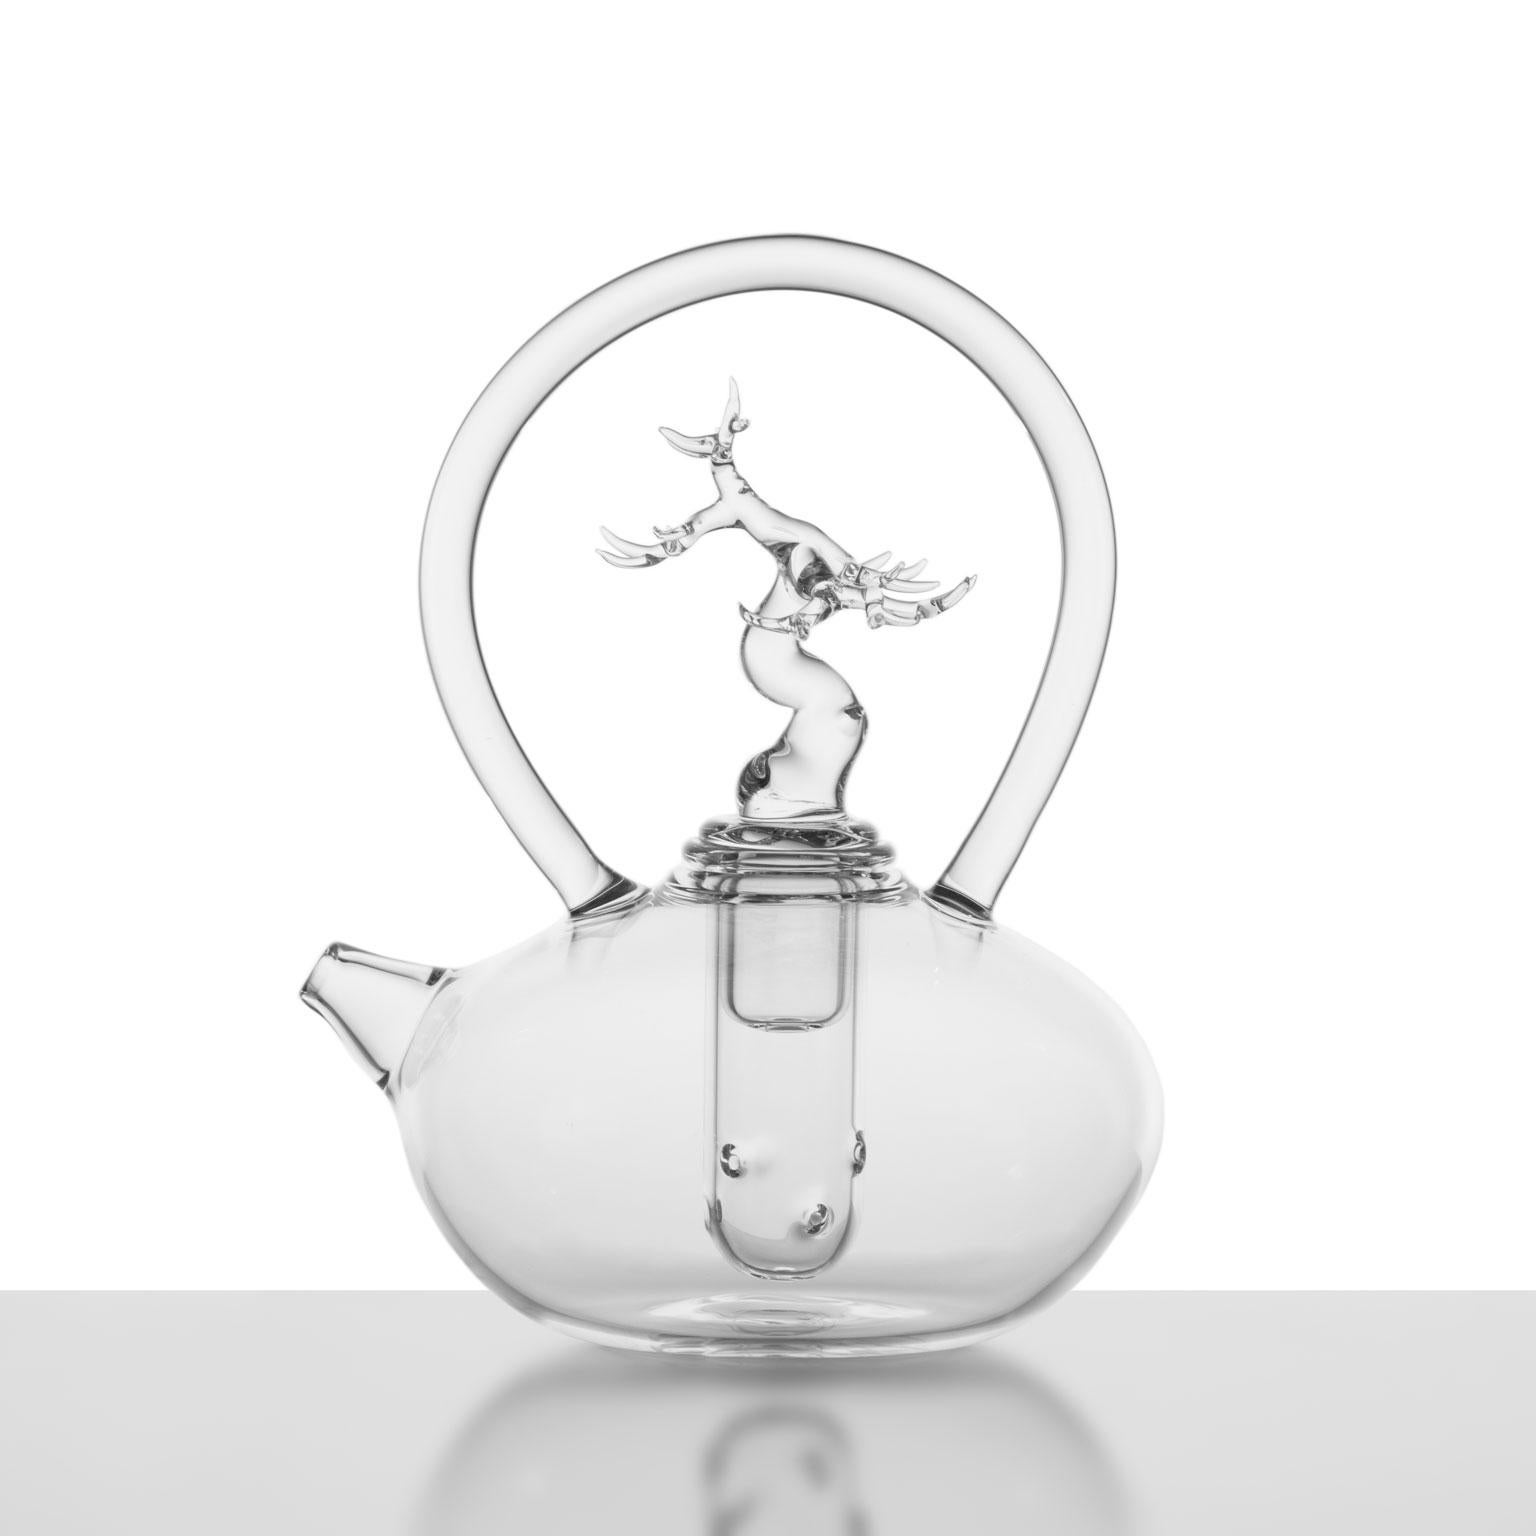 A Hand-Blown Glass Teapot by Simone Crestani

Bonsai Teapot is one of the pieces from the Nature Collection.

